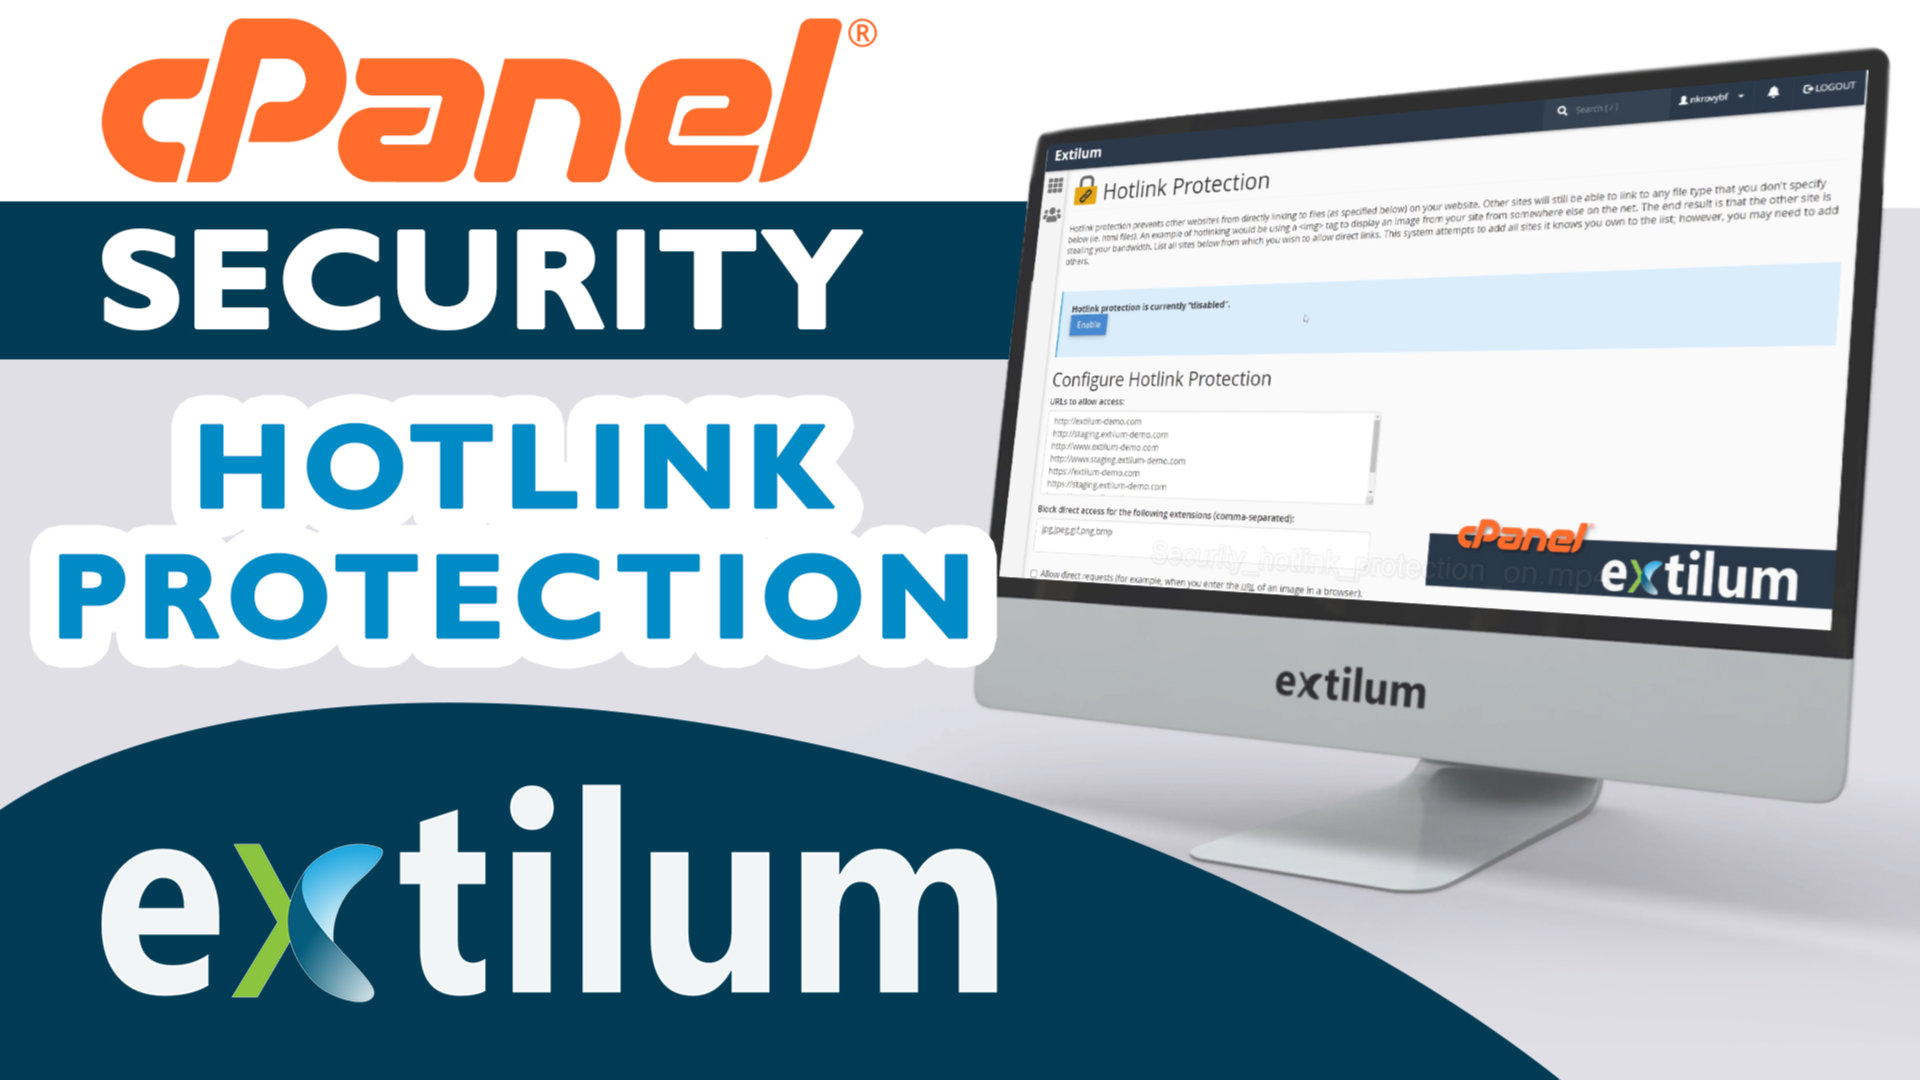 Extilum cpanel - security - hotlink protection